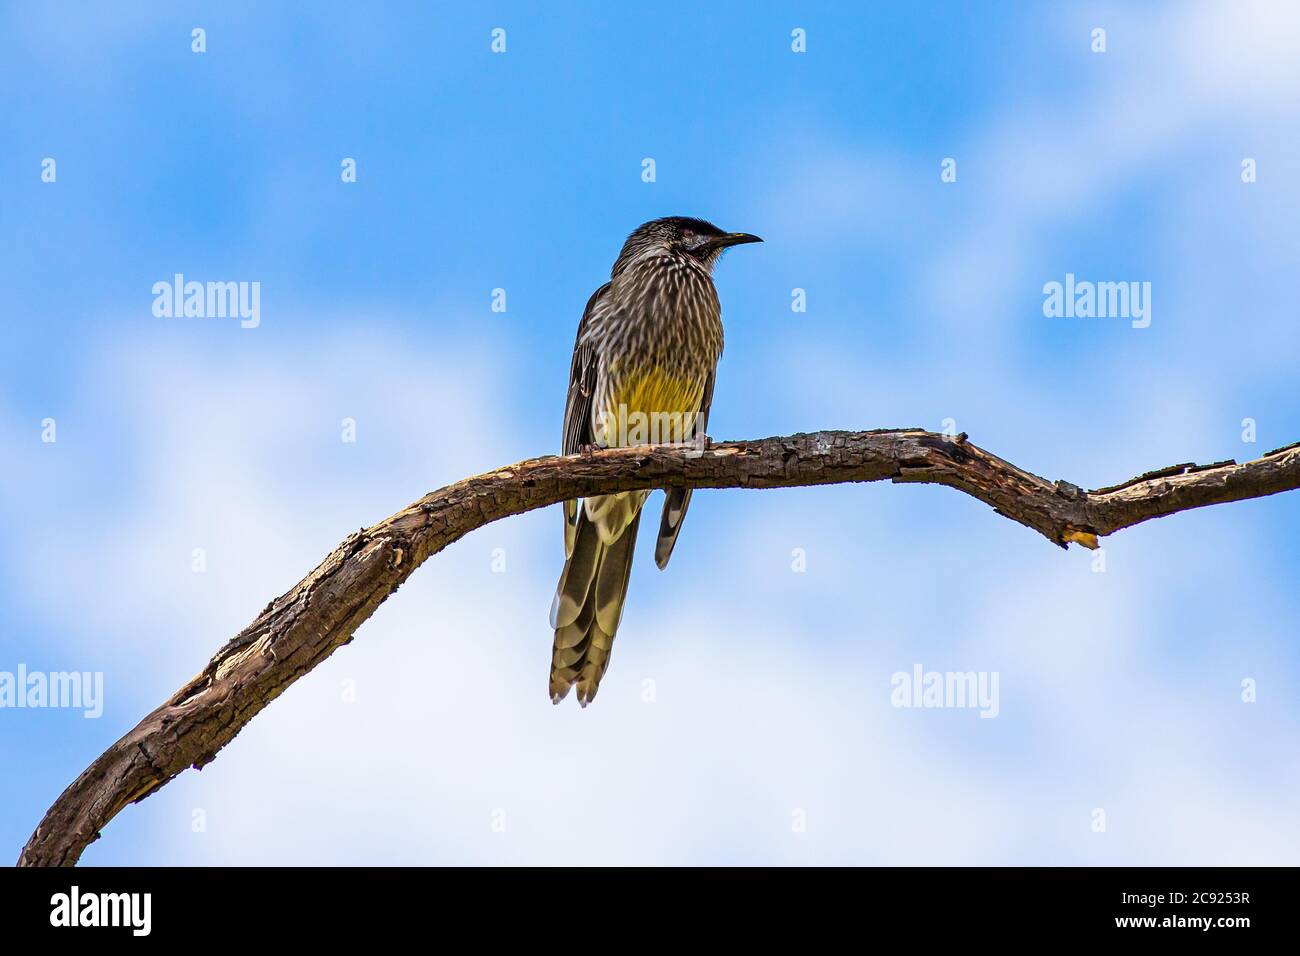 A Red Wattle Bird in a tree Stock Photo